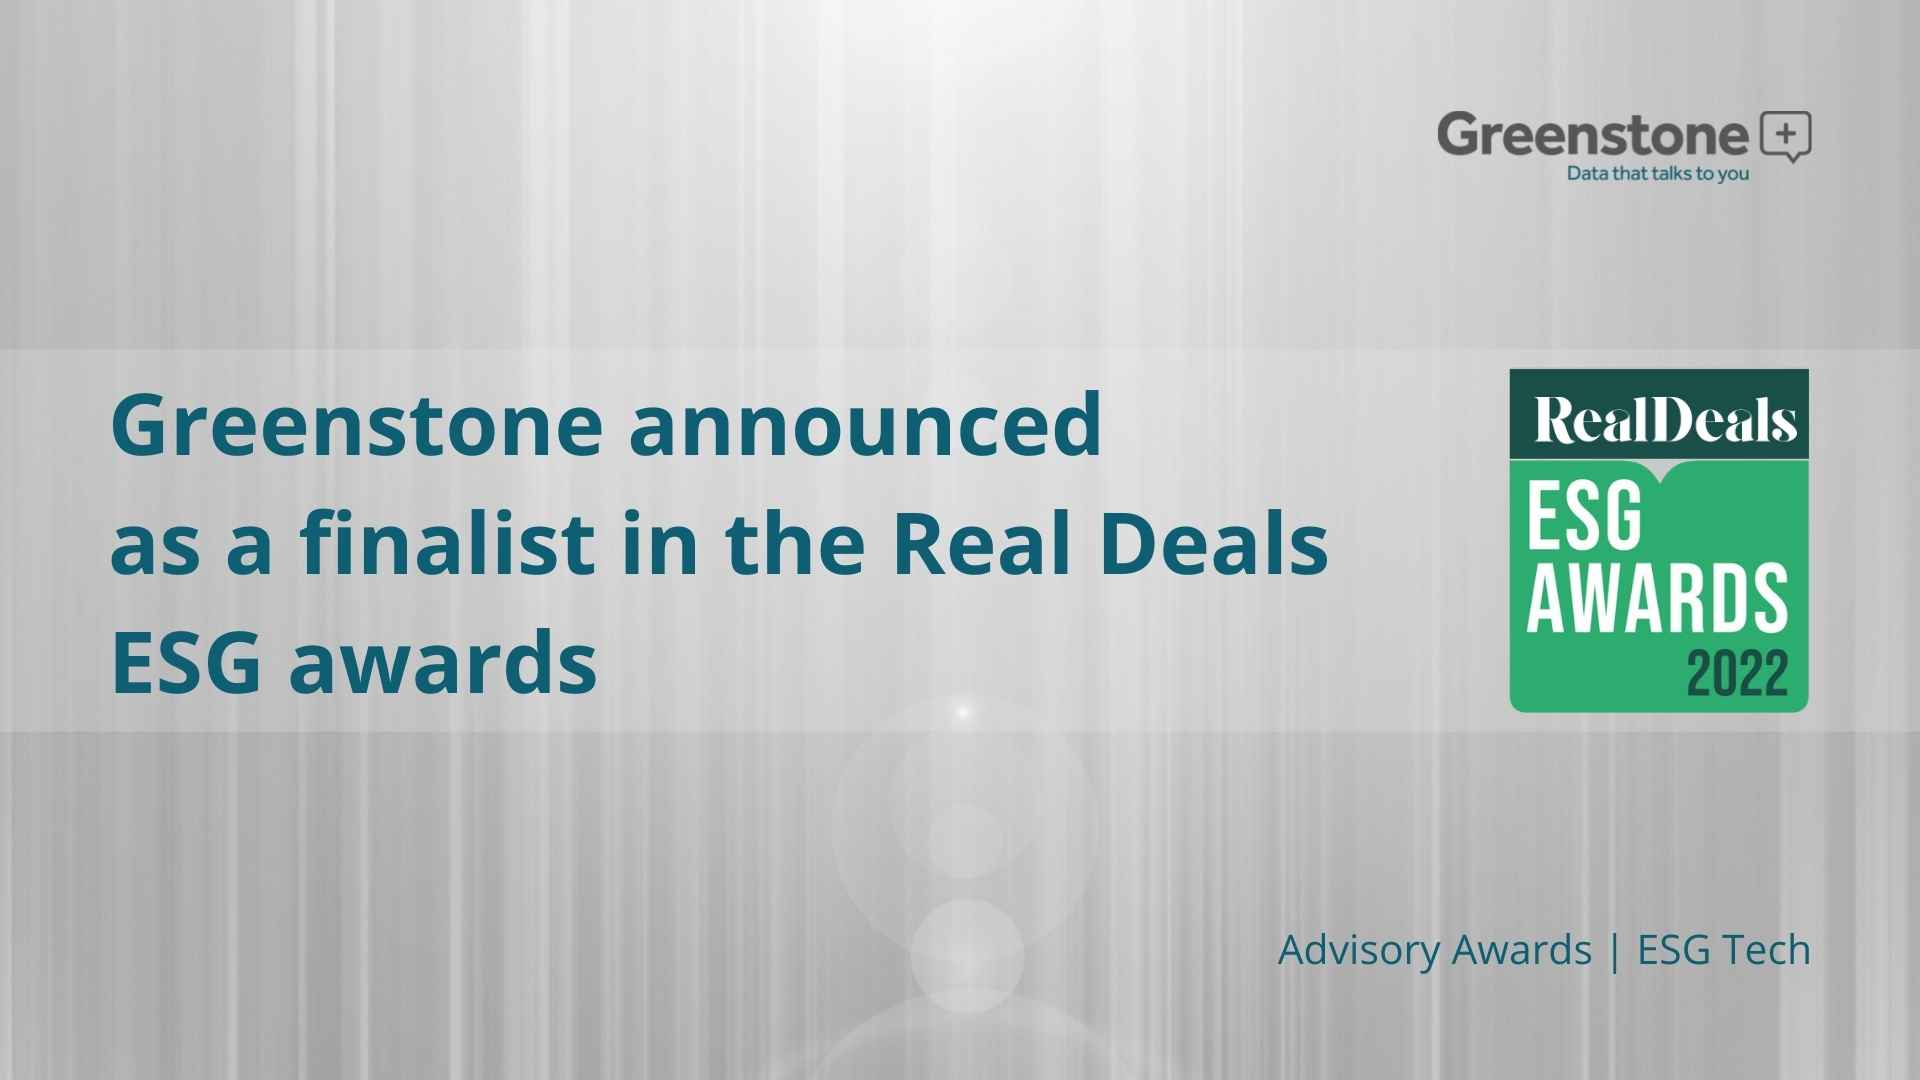 Greenstone announced as a finalist in the Real Deals ESG awards